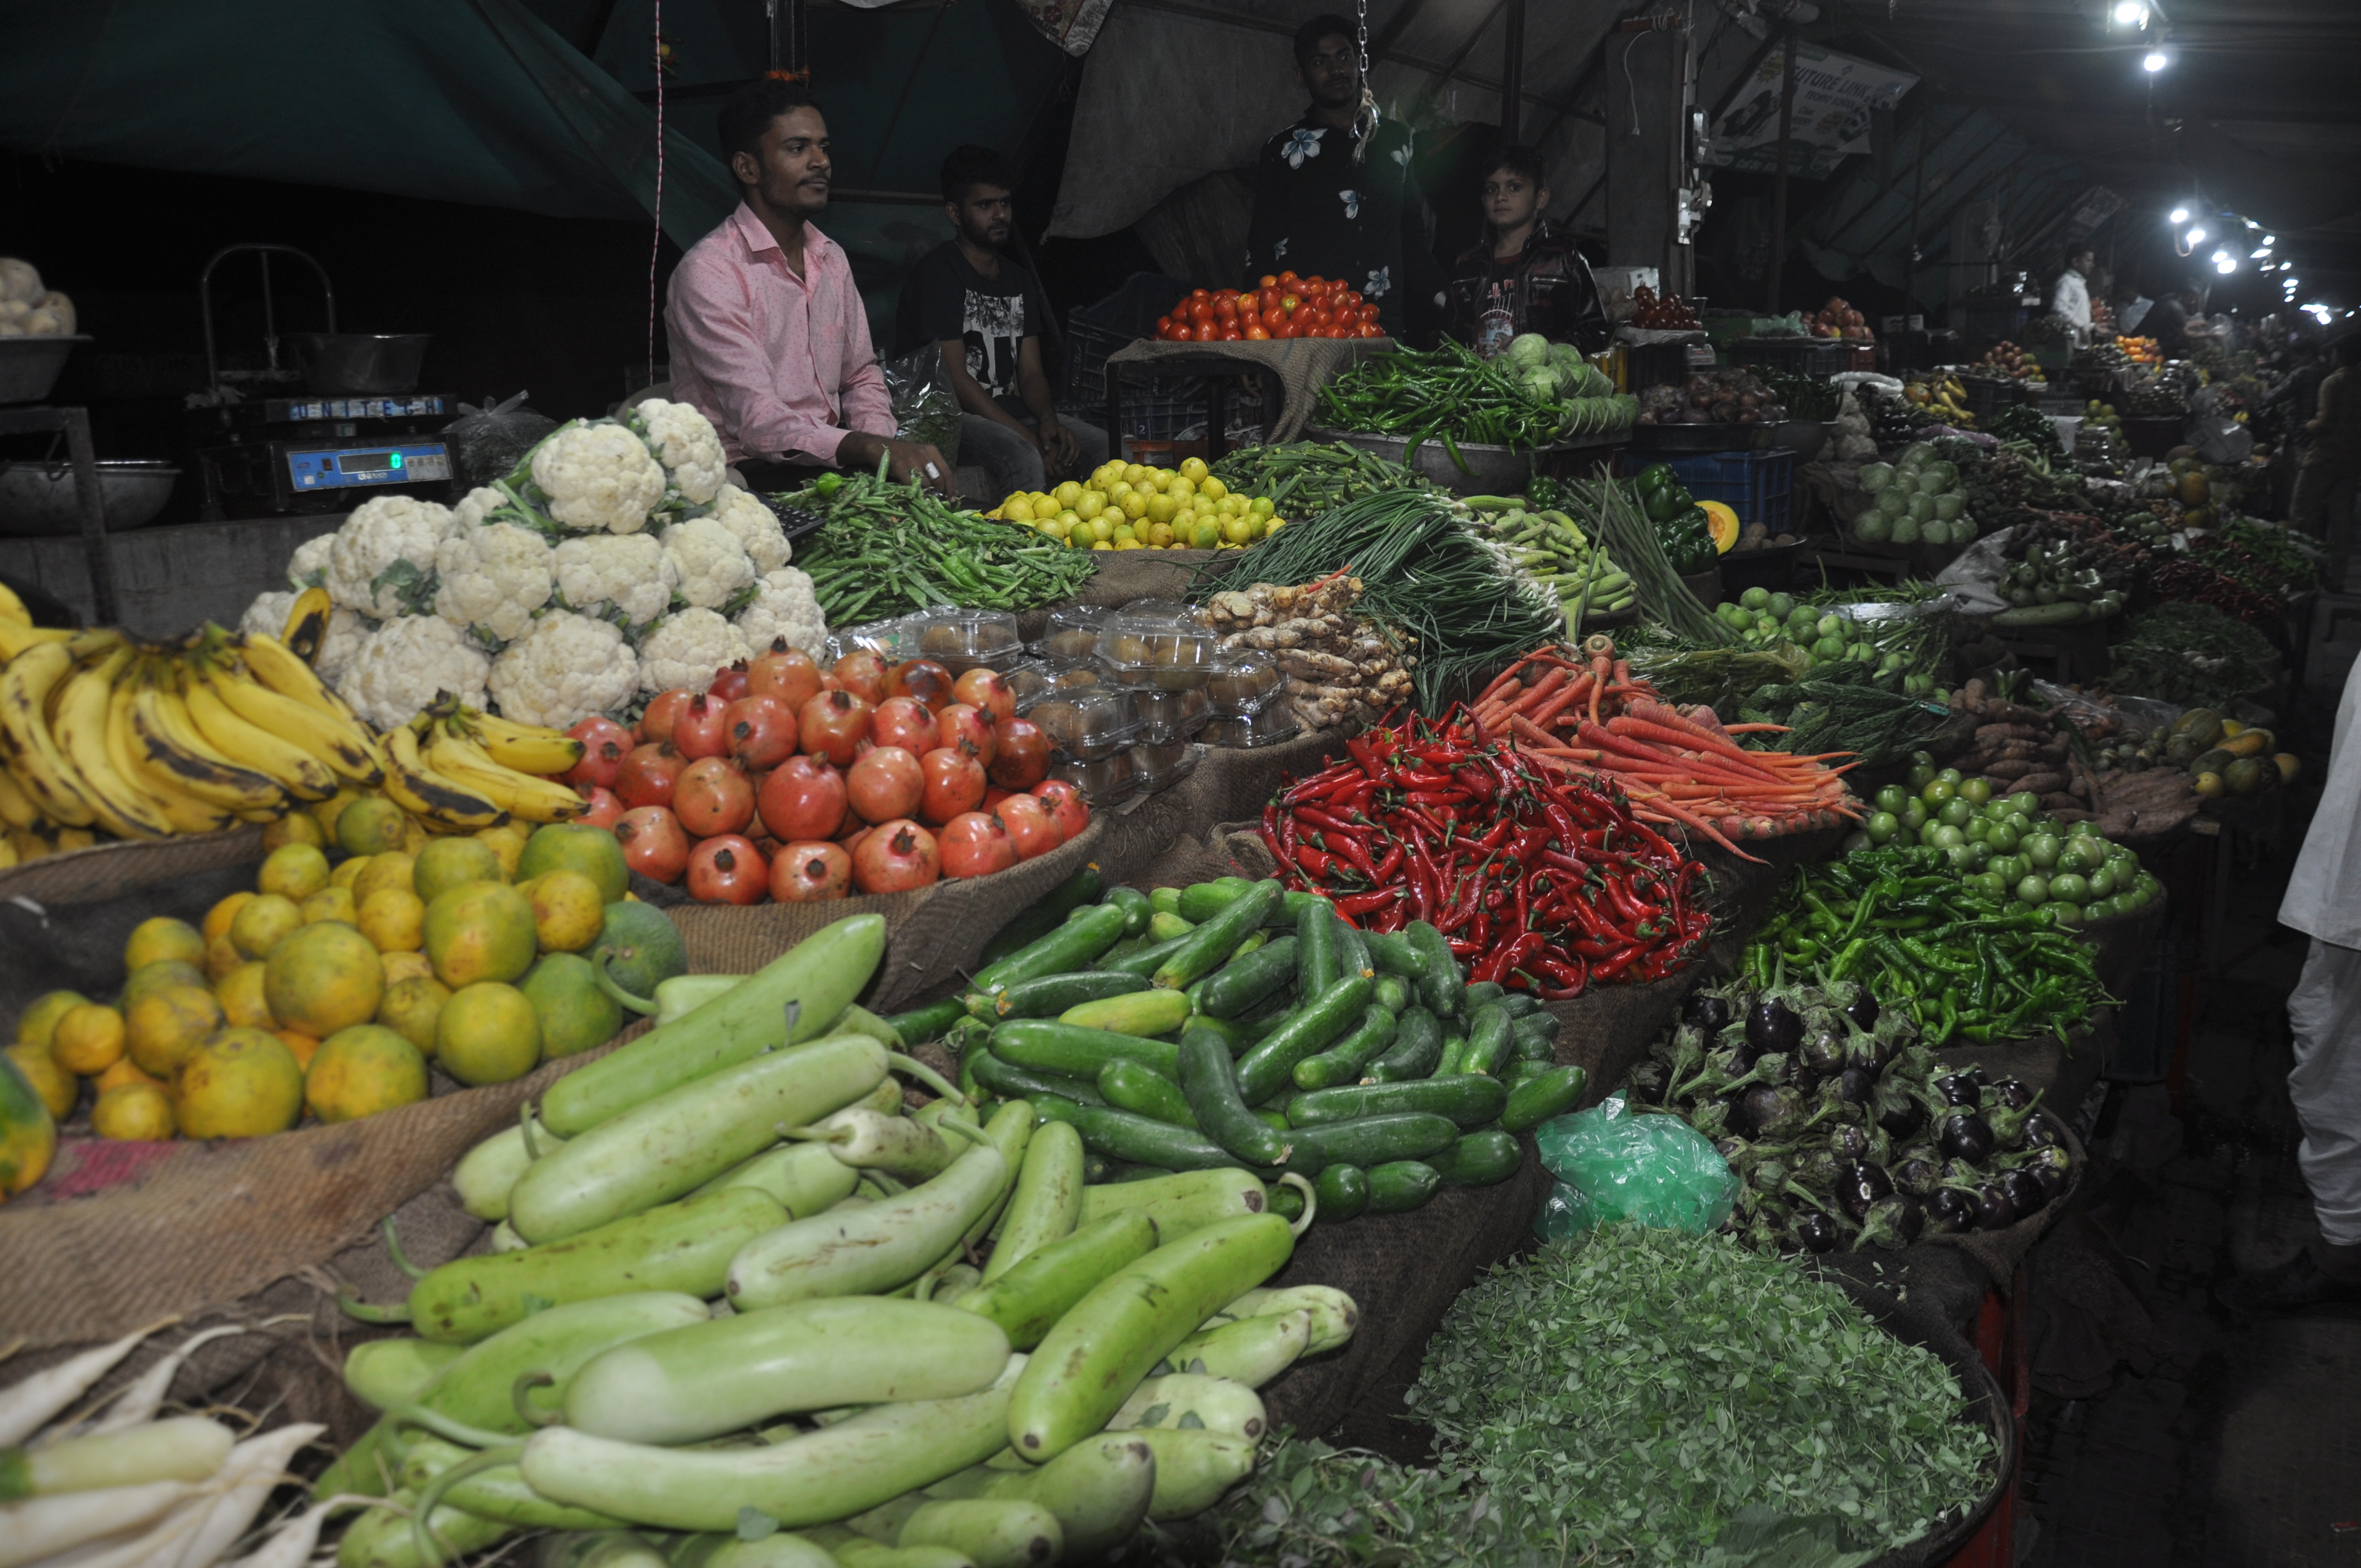 Vegetable prices in market sky high due low arrivals and middlemen